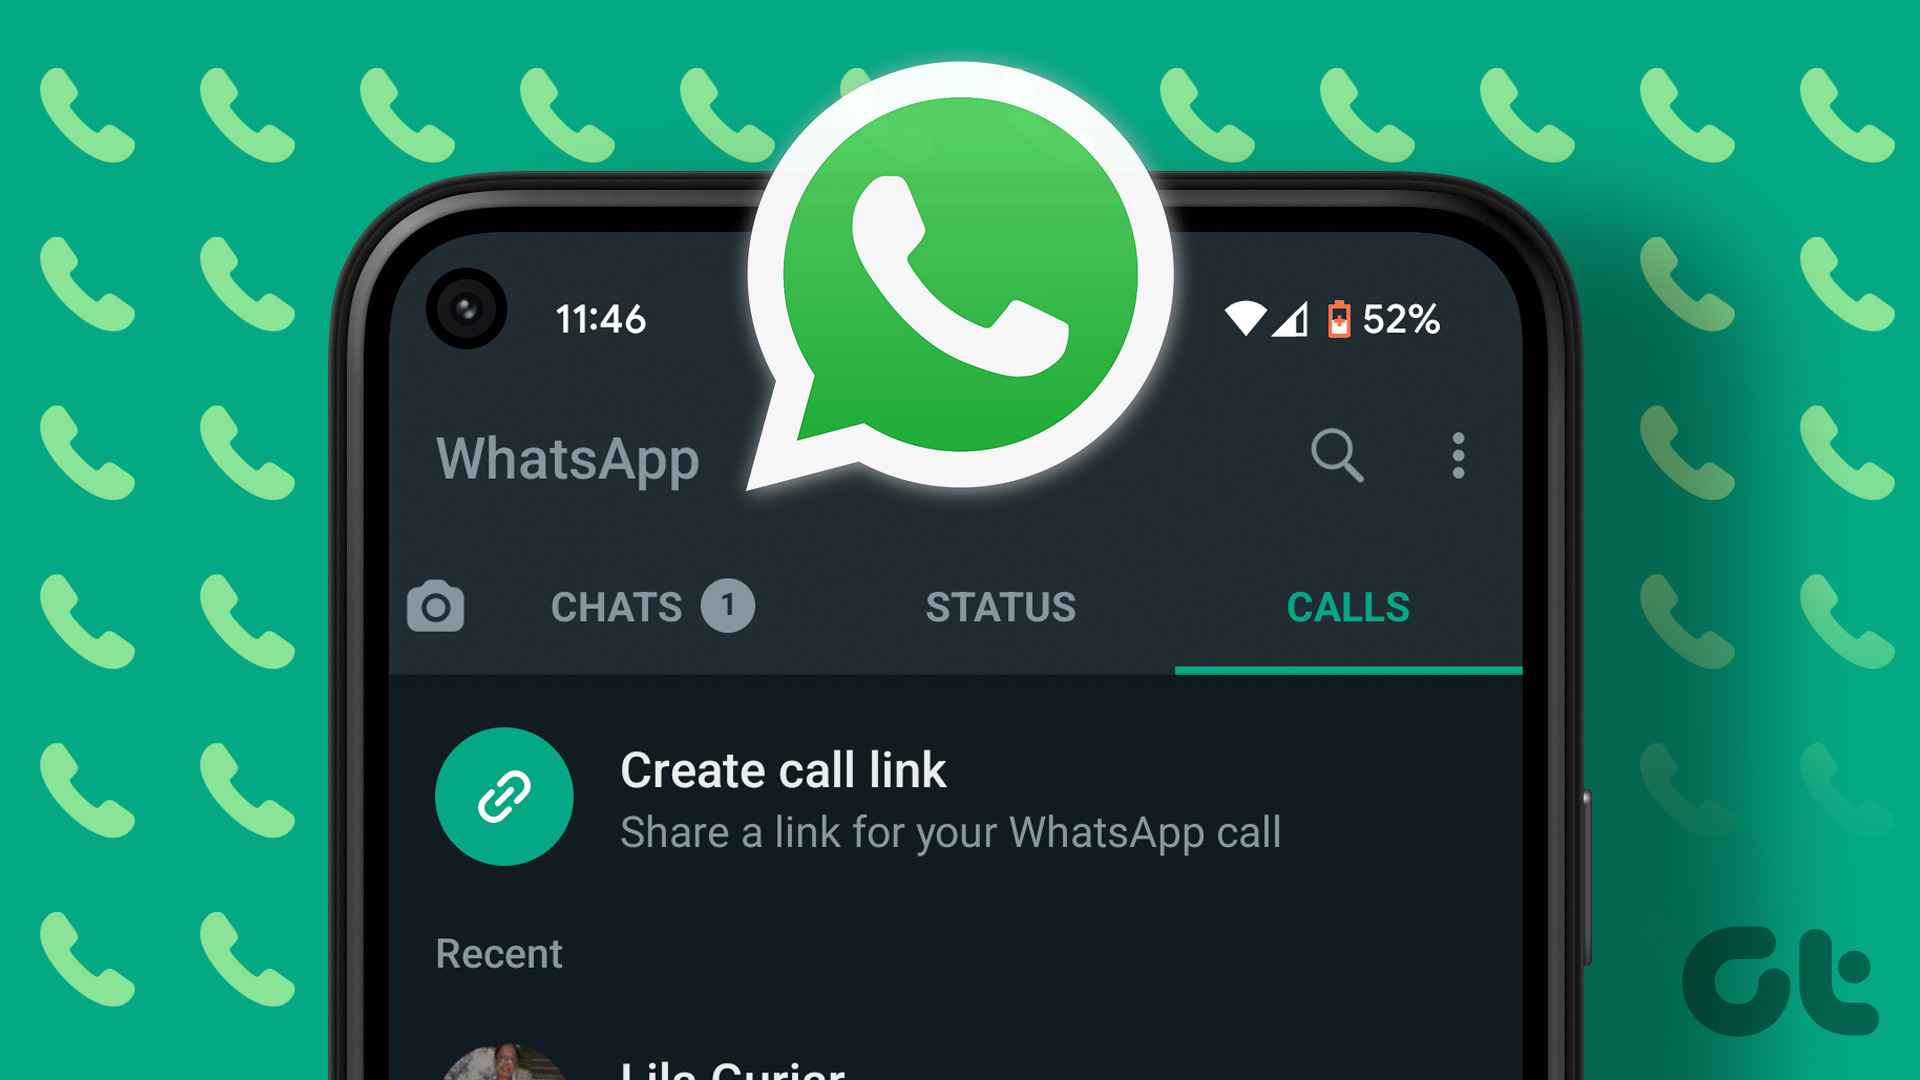 How To Create And Share A Call Link On Whatsapp